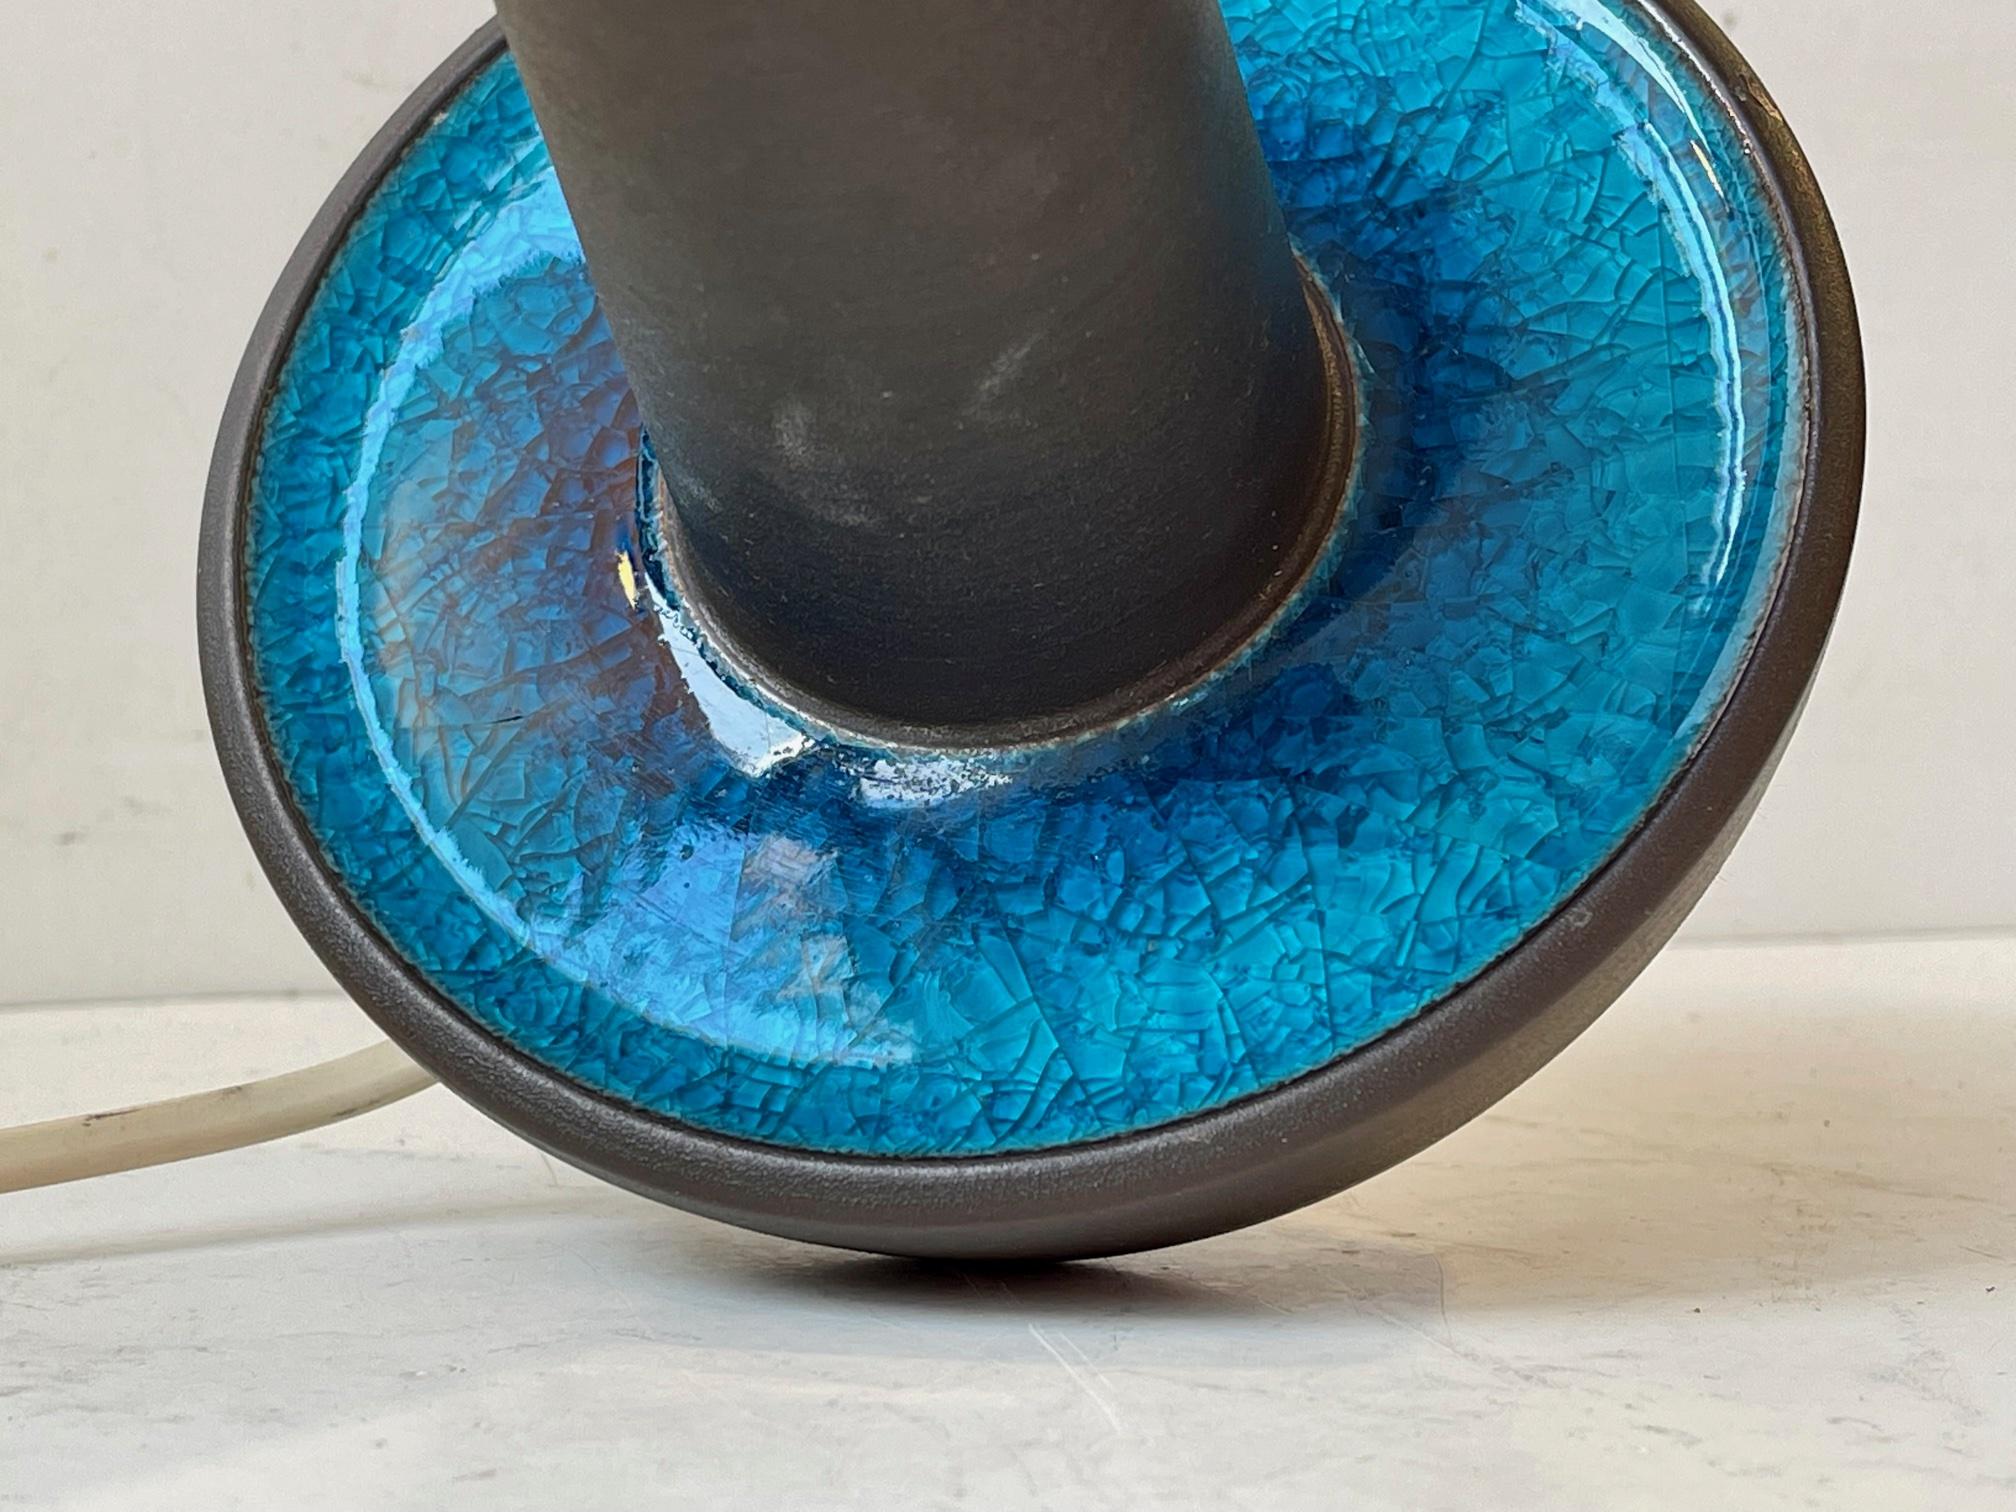 One of the most sought out designs by the danish ceramist Einar Johansen. This version with prominent Turquoise craquele glaze and blue accents is commonly called the Caribbean Sea. This is design number 1072 and it measures 25 cm (10 inches)